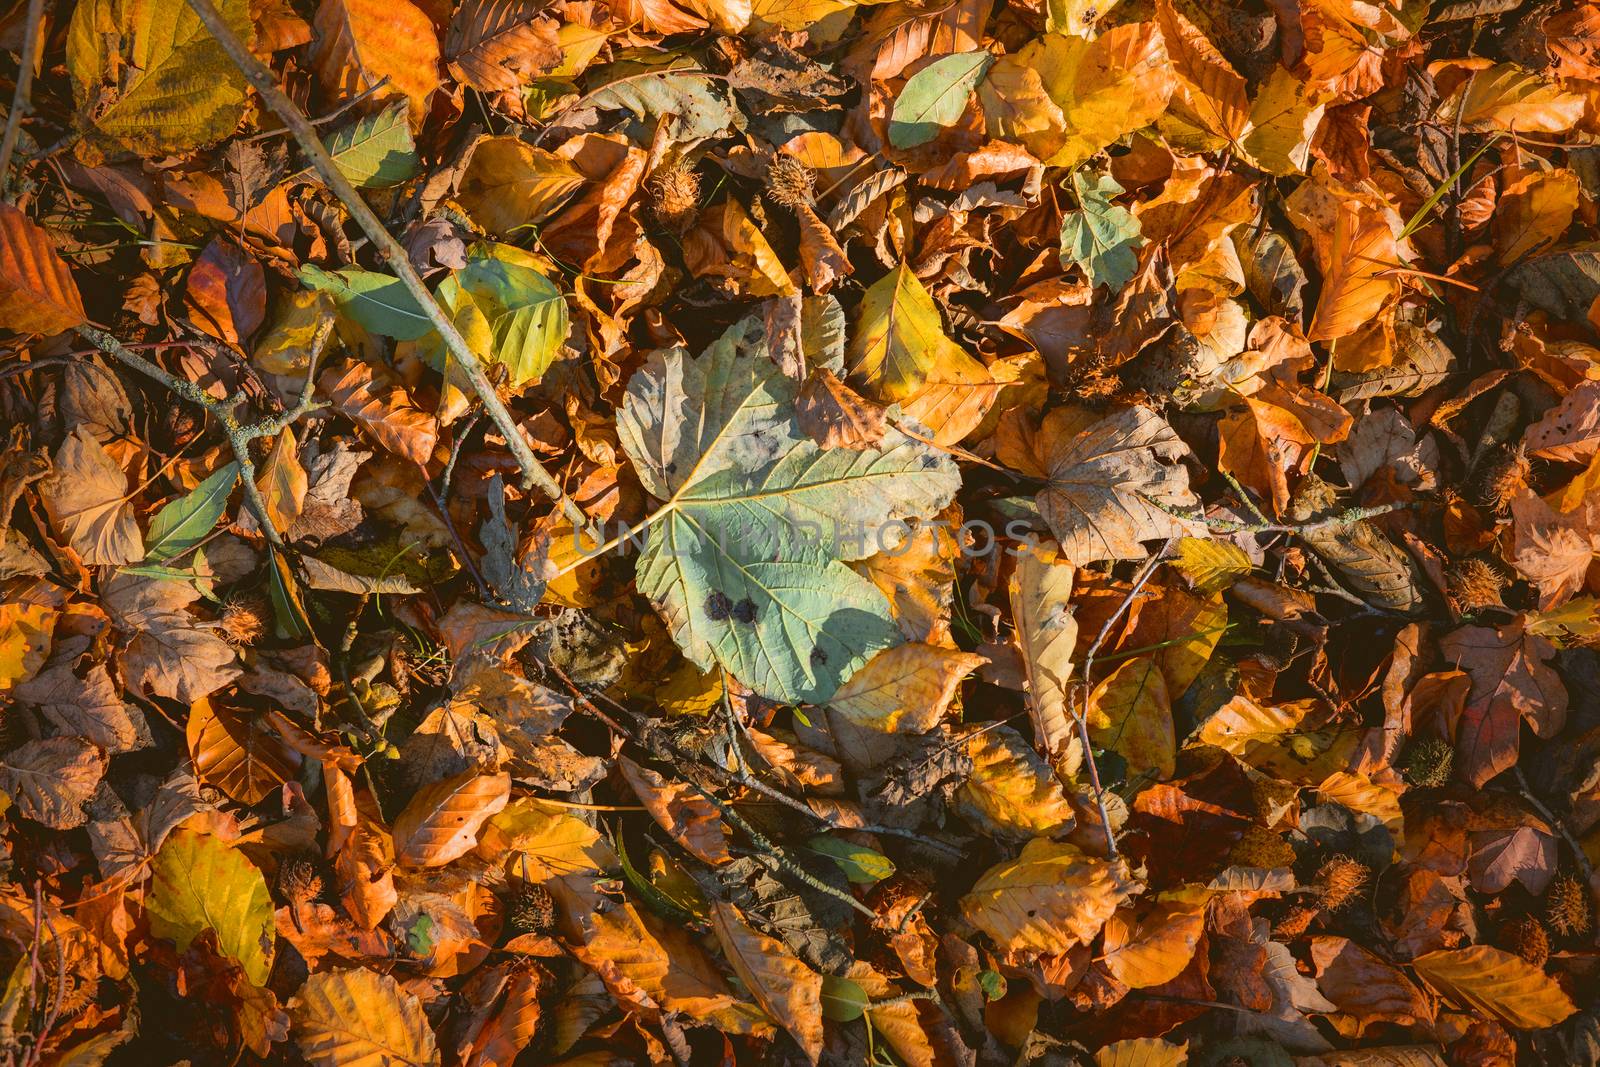 Leaves in warm colors in the fall with maple and beech leaves mixed together in Autumn